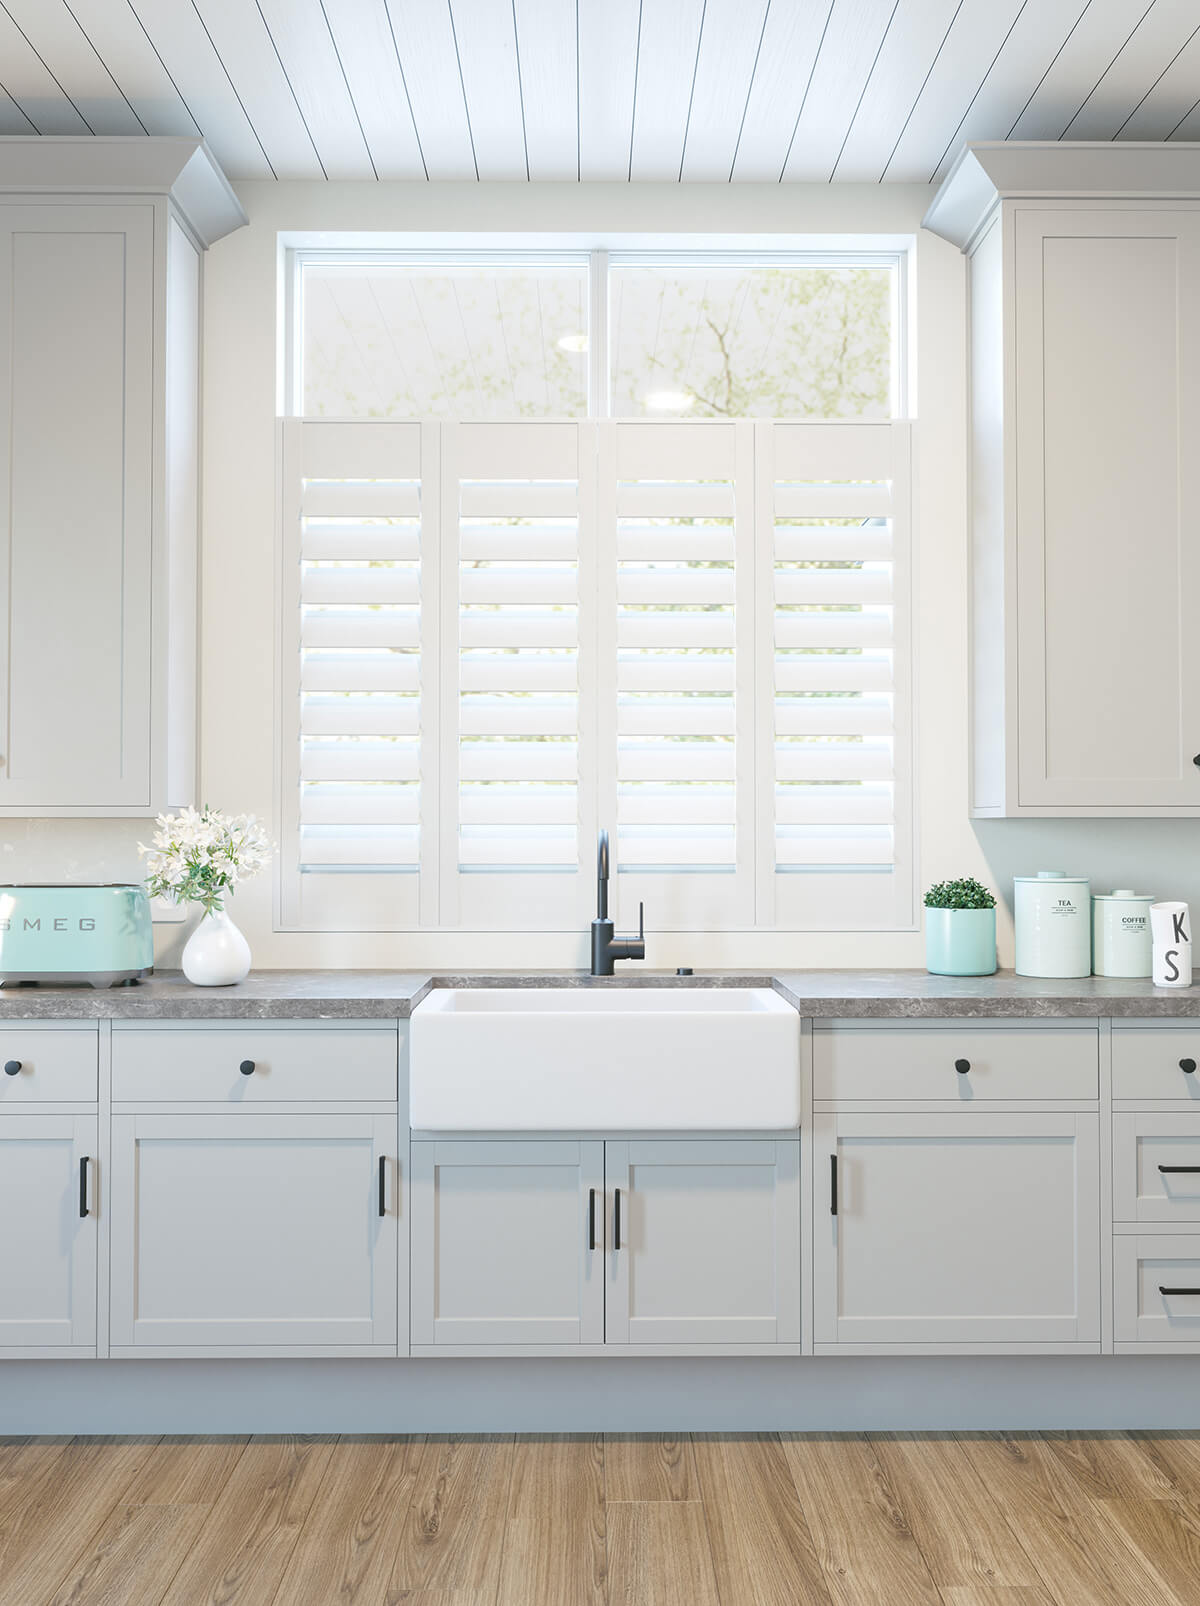 Suppliers of Customizable Plantation Shutters Designs